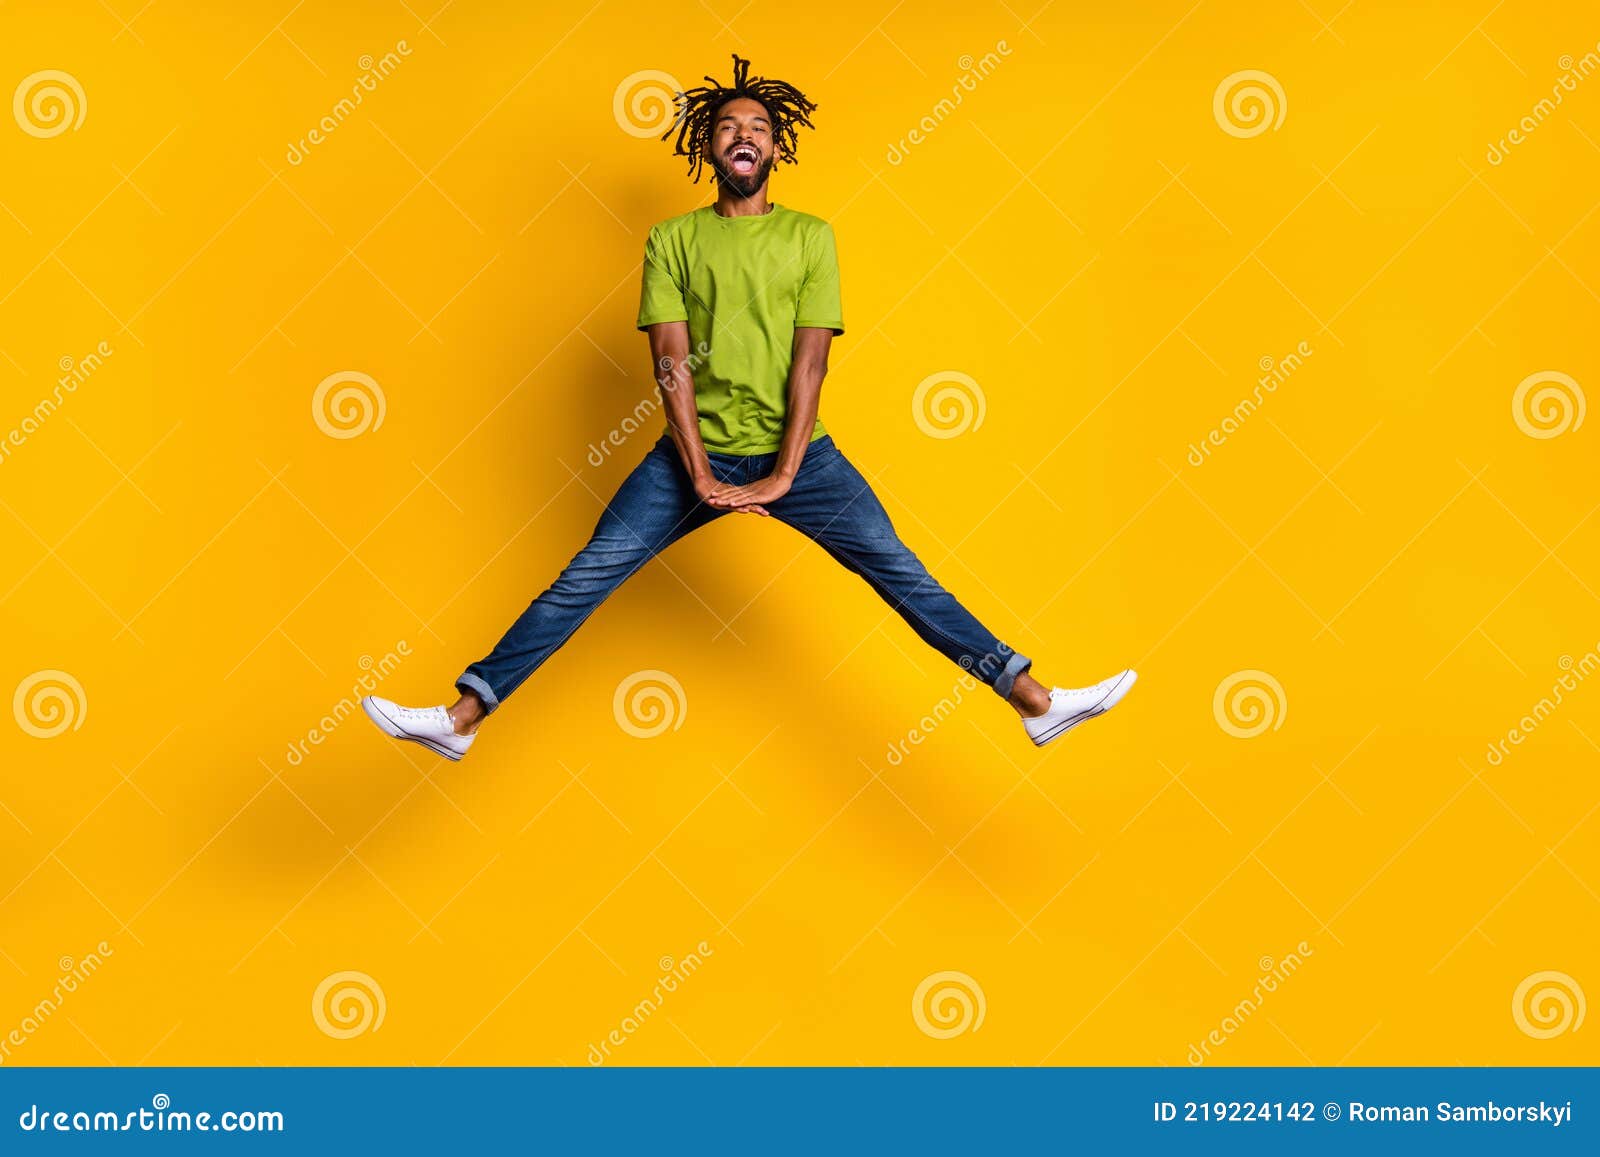 Full Length Photo Portrait Of Guy Jumping Up Spreading Legs Isolated On